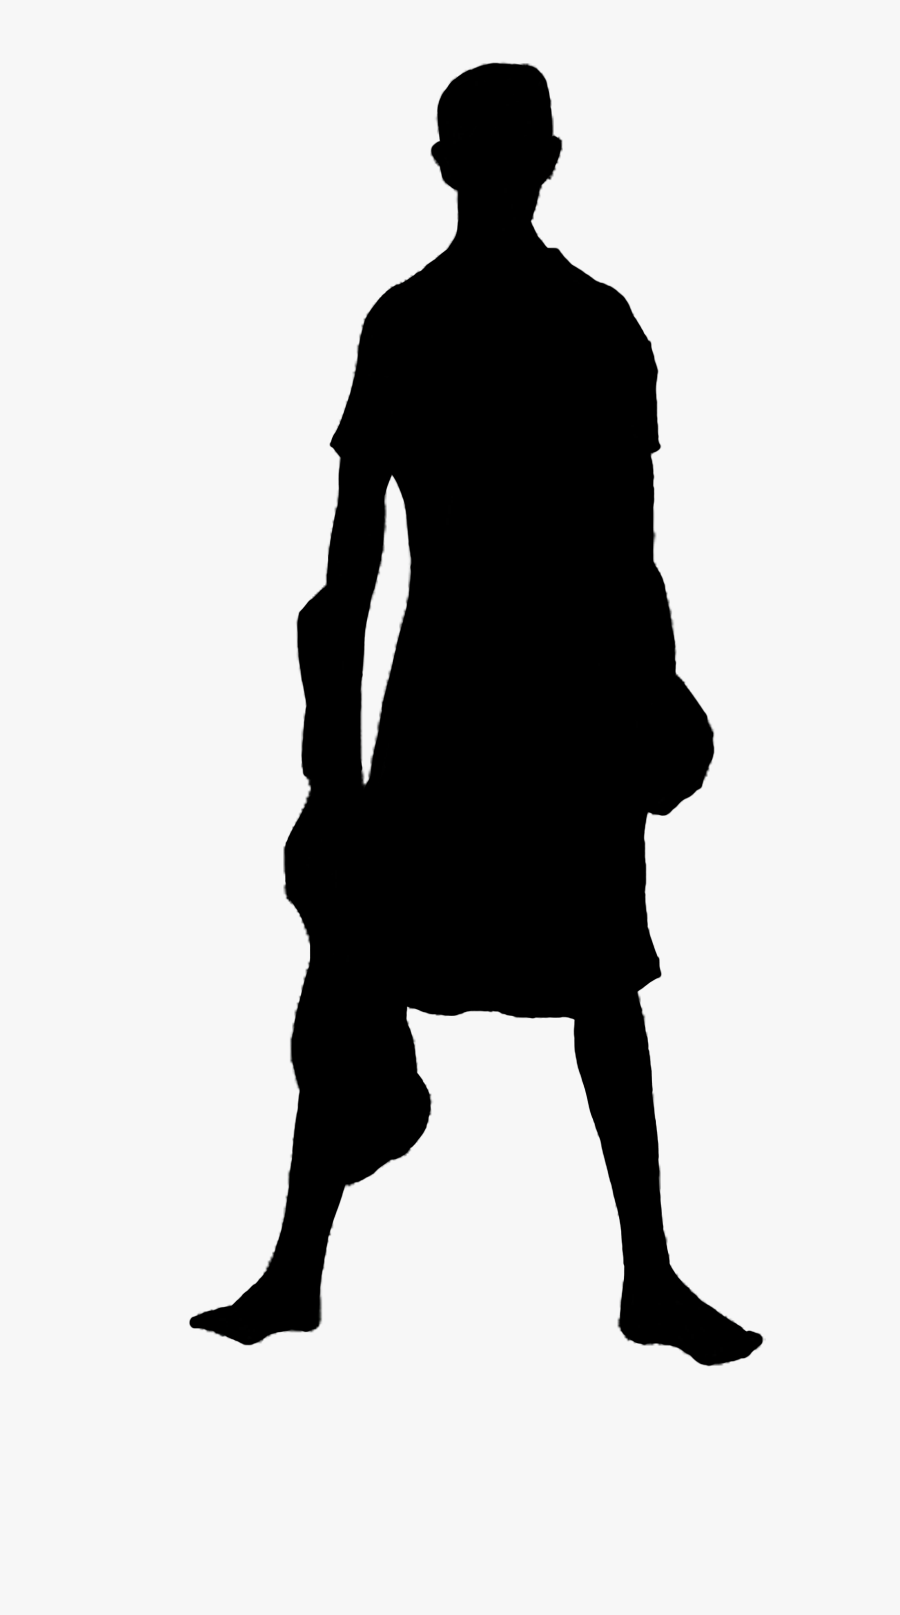 Playing Instrument Silhouette Png, Transparent Clipart